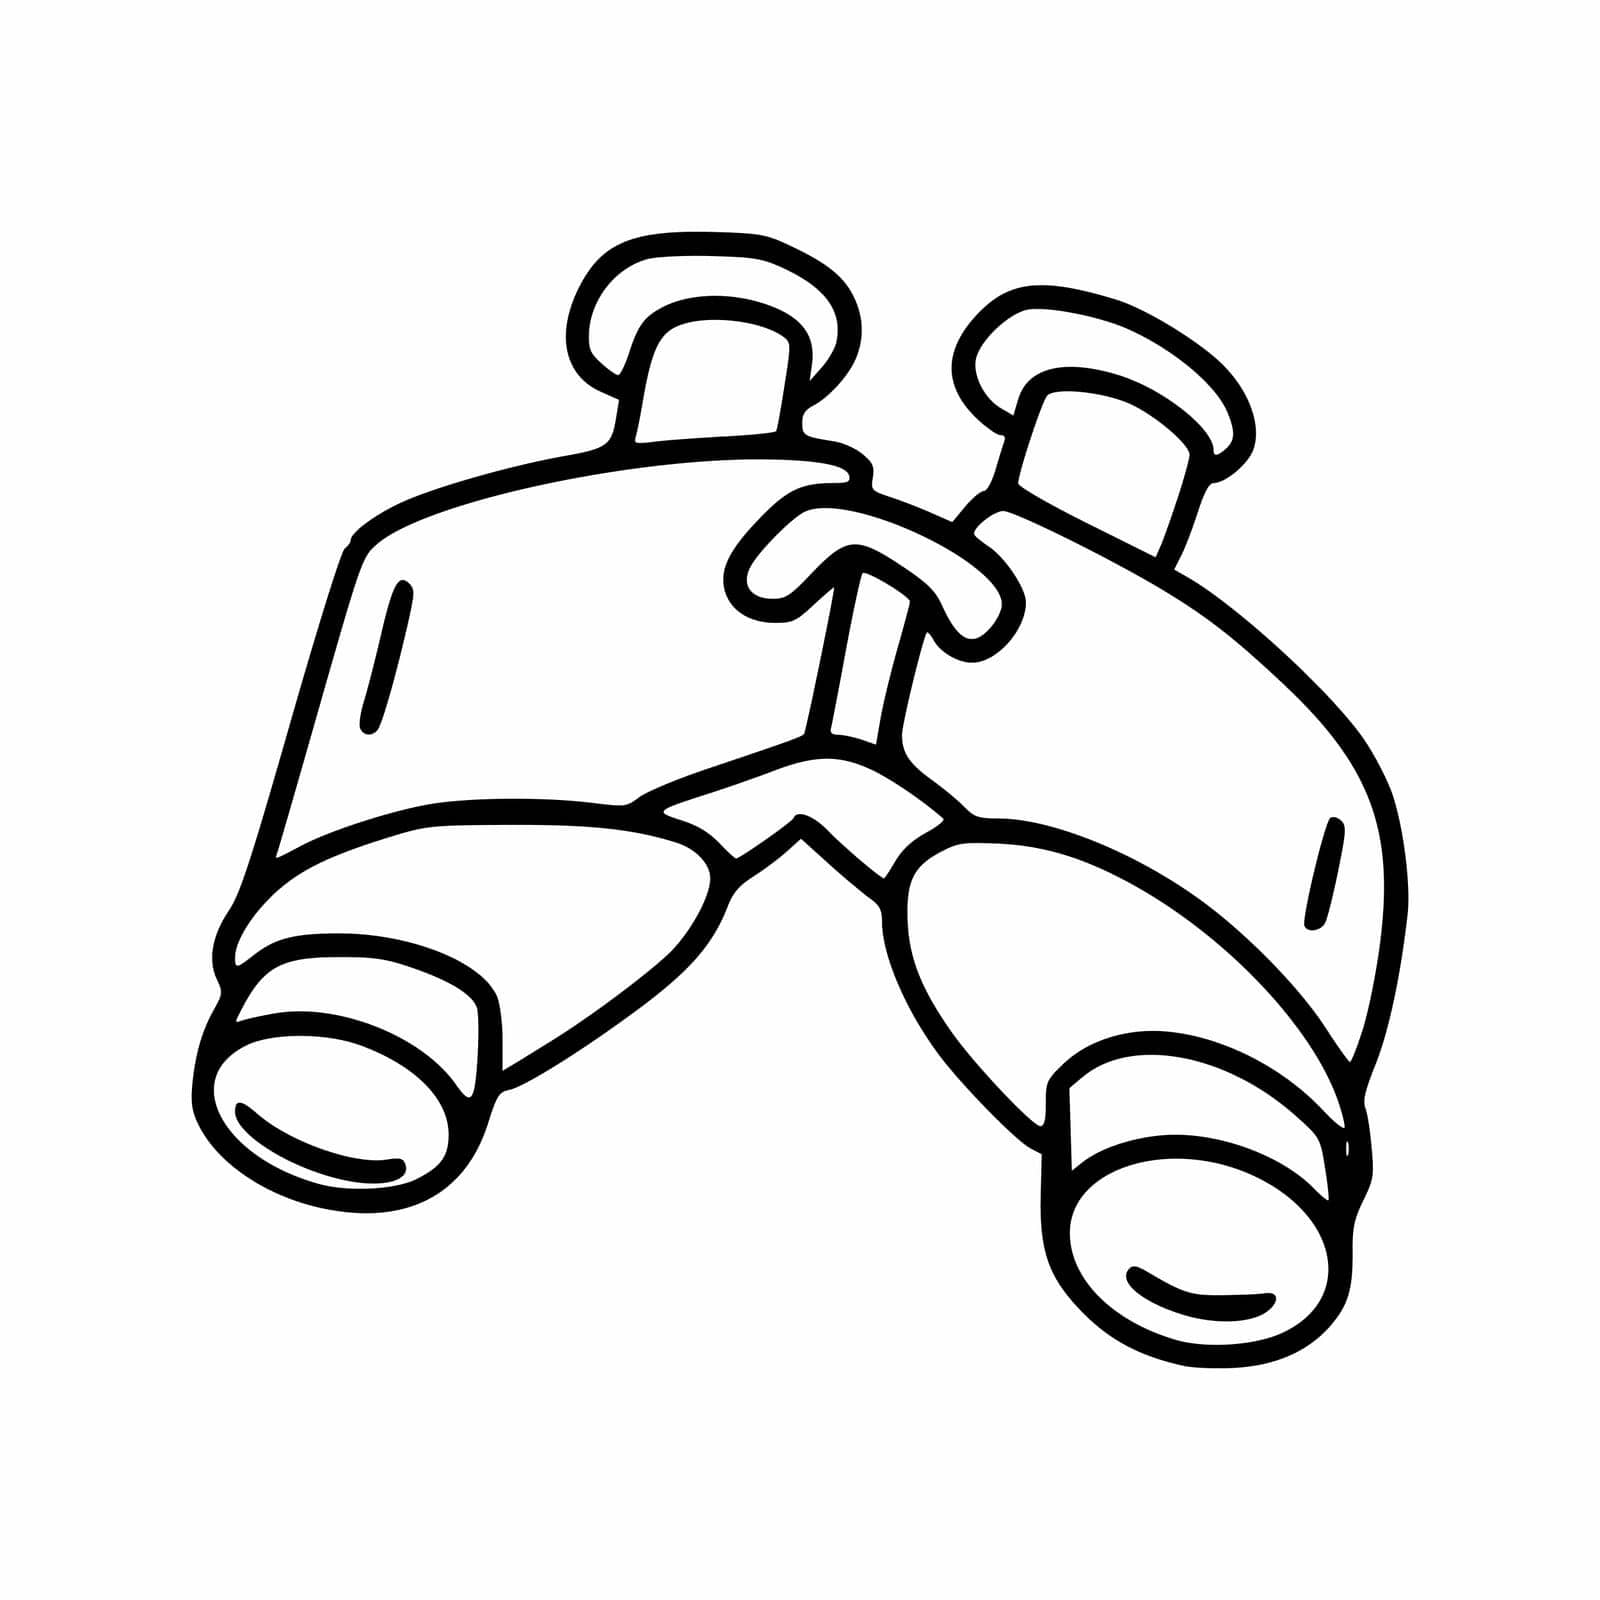 Doodle style binocular drawing. Vector icon on white background.